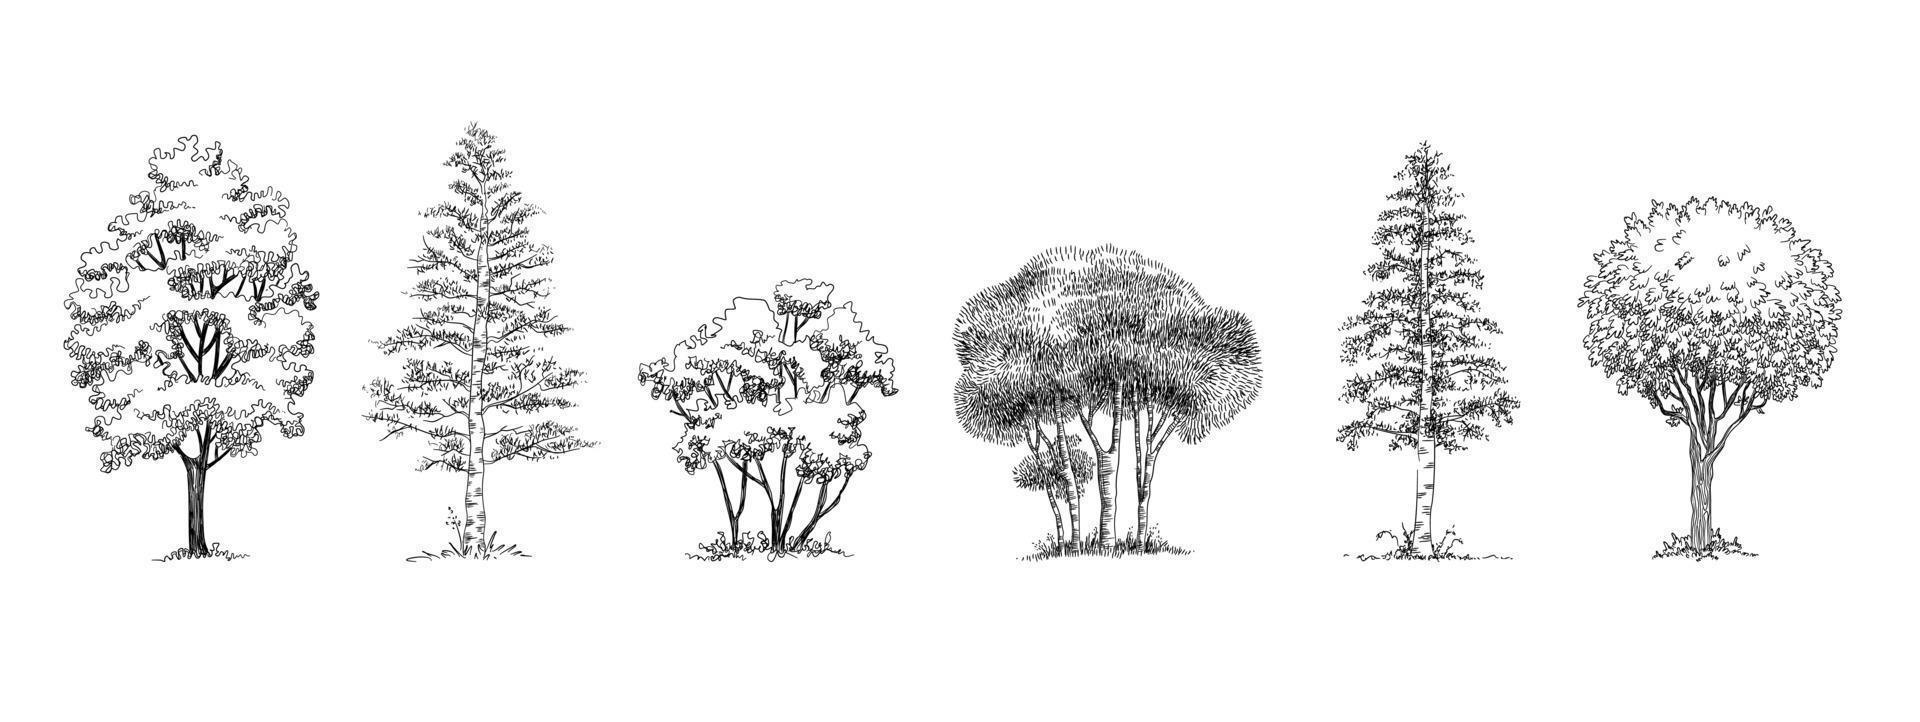 Forest park trees icons set, outline hand drawn style vector